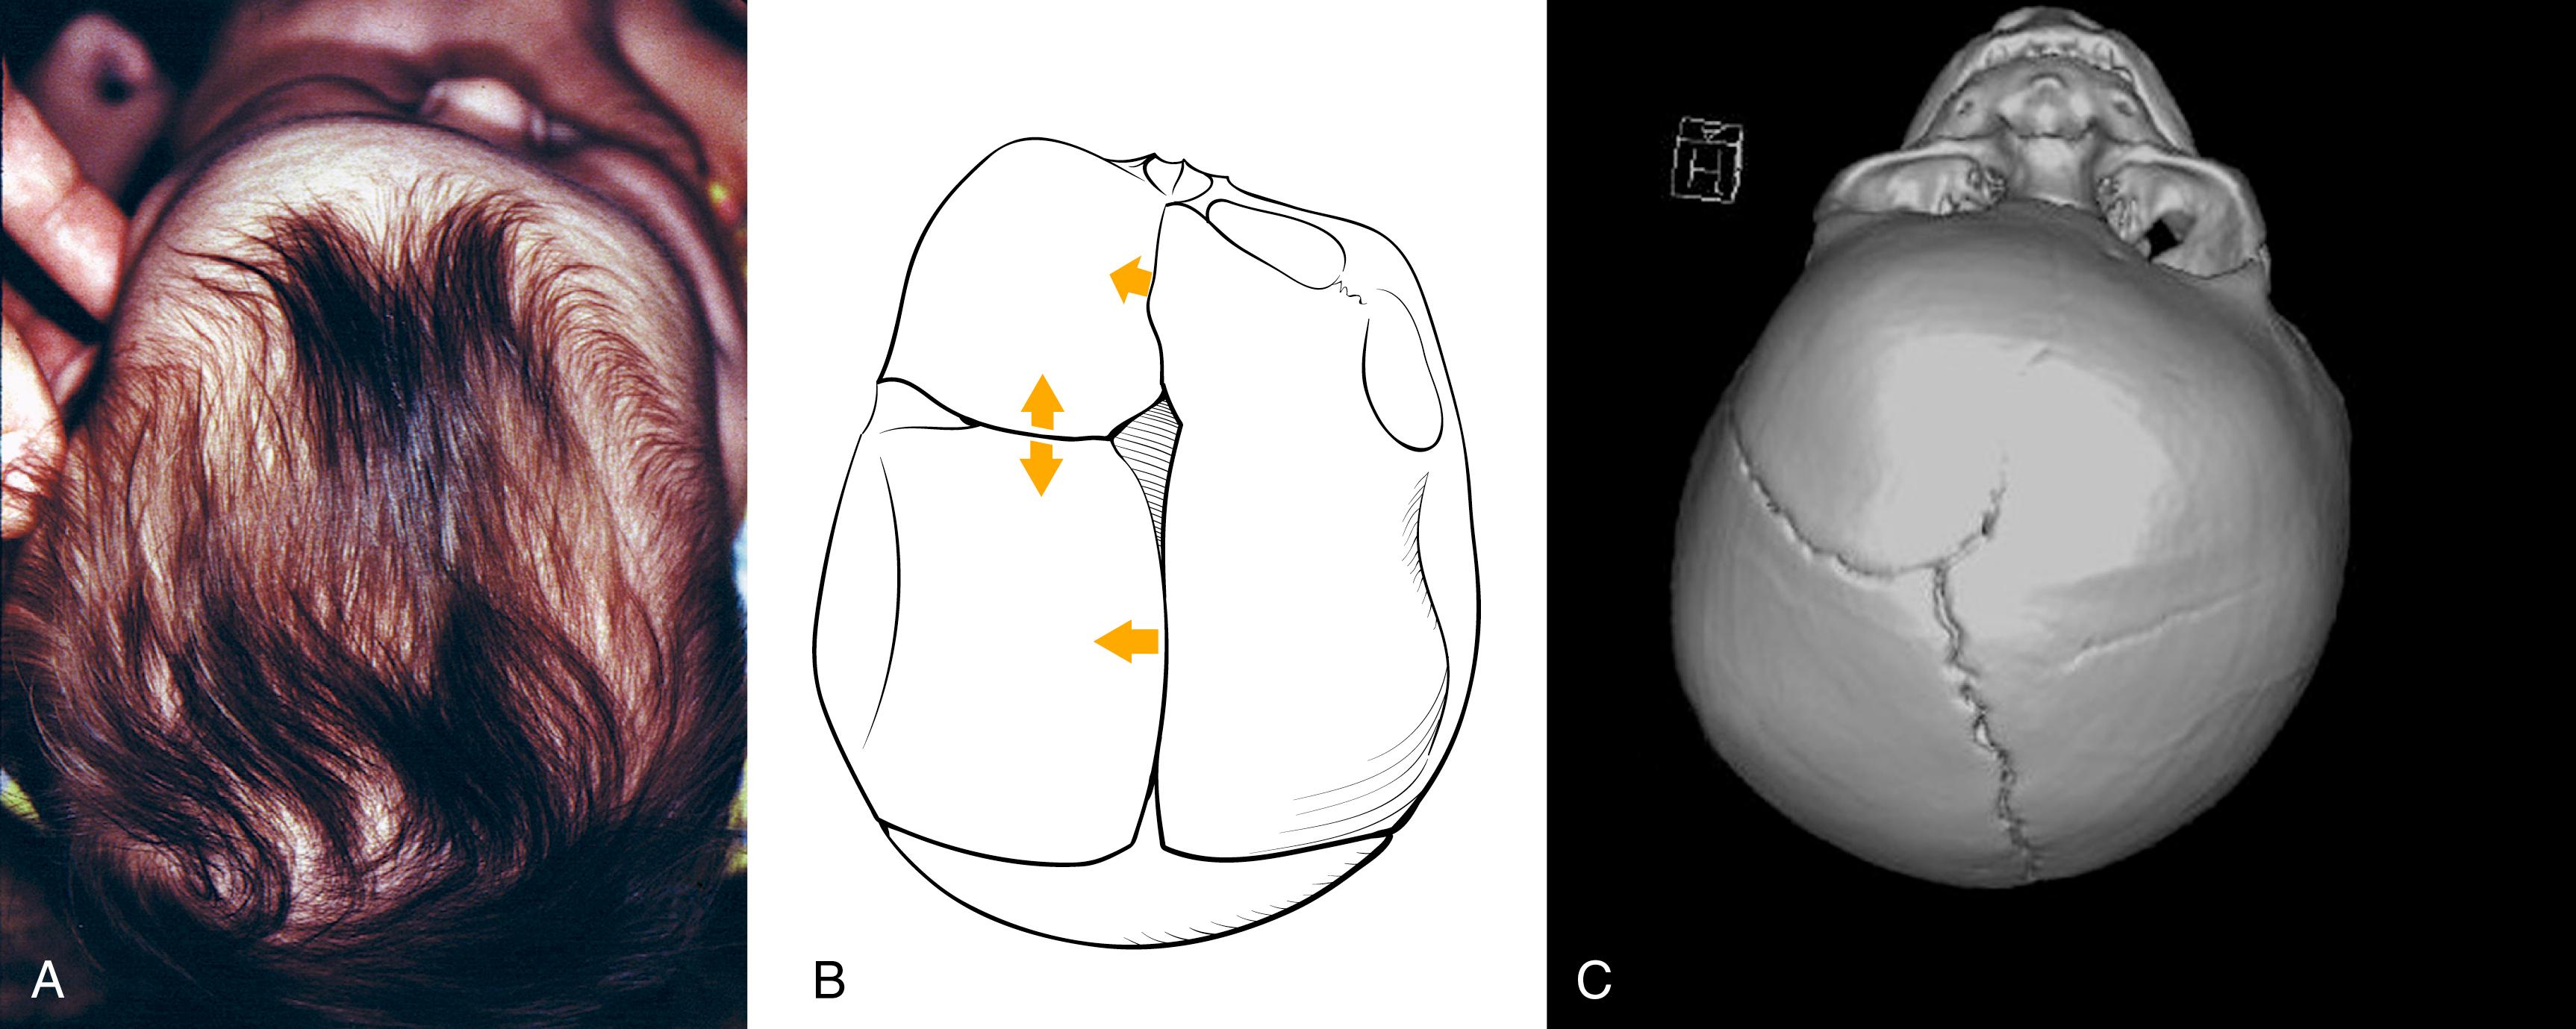 Fig. 6.5, (A) Unilateral coronal synostosis resulting in plagiocephaly. Note that the cranial vault irregularities are not confined to those ipsilateral to the defect. Compensatory growth has resulted in frontal bossing on the contralateral side. (B) A schematic representation of plagiocephaly. (C) Three-dimensional computed tomography in a different child highlighting right unilateral coronal synostosis and frontal flattening.